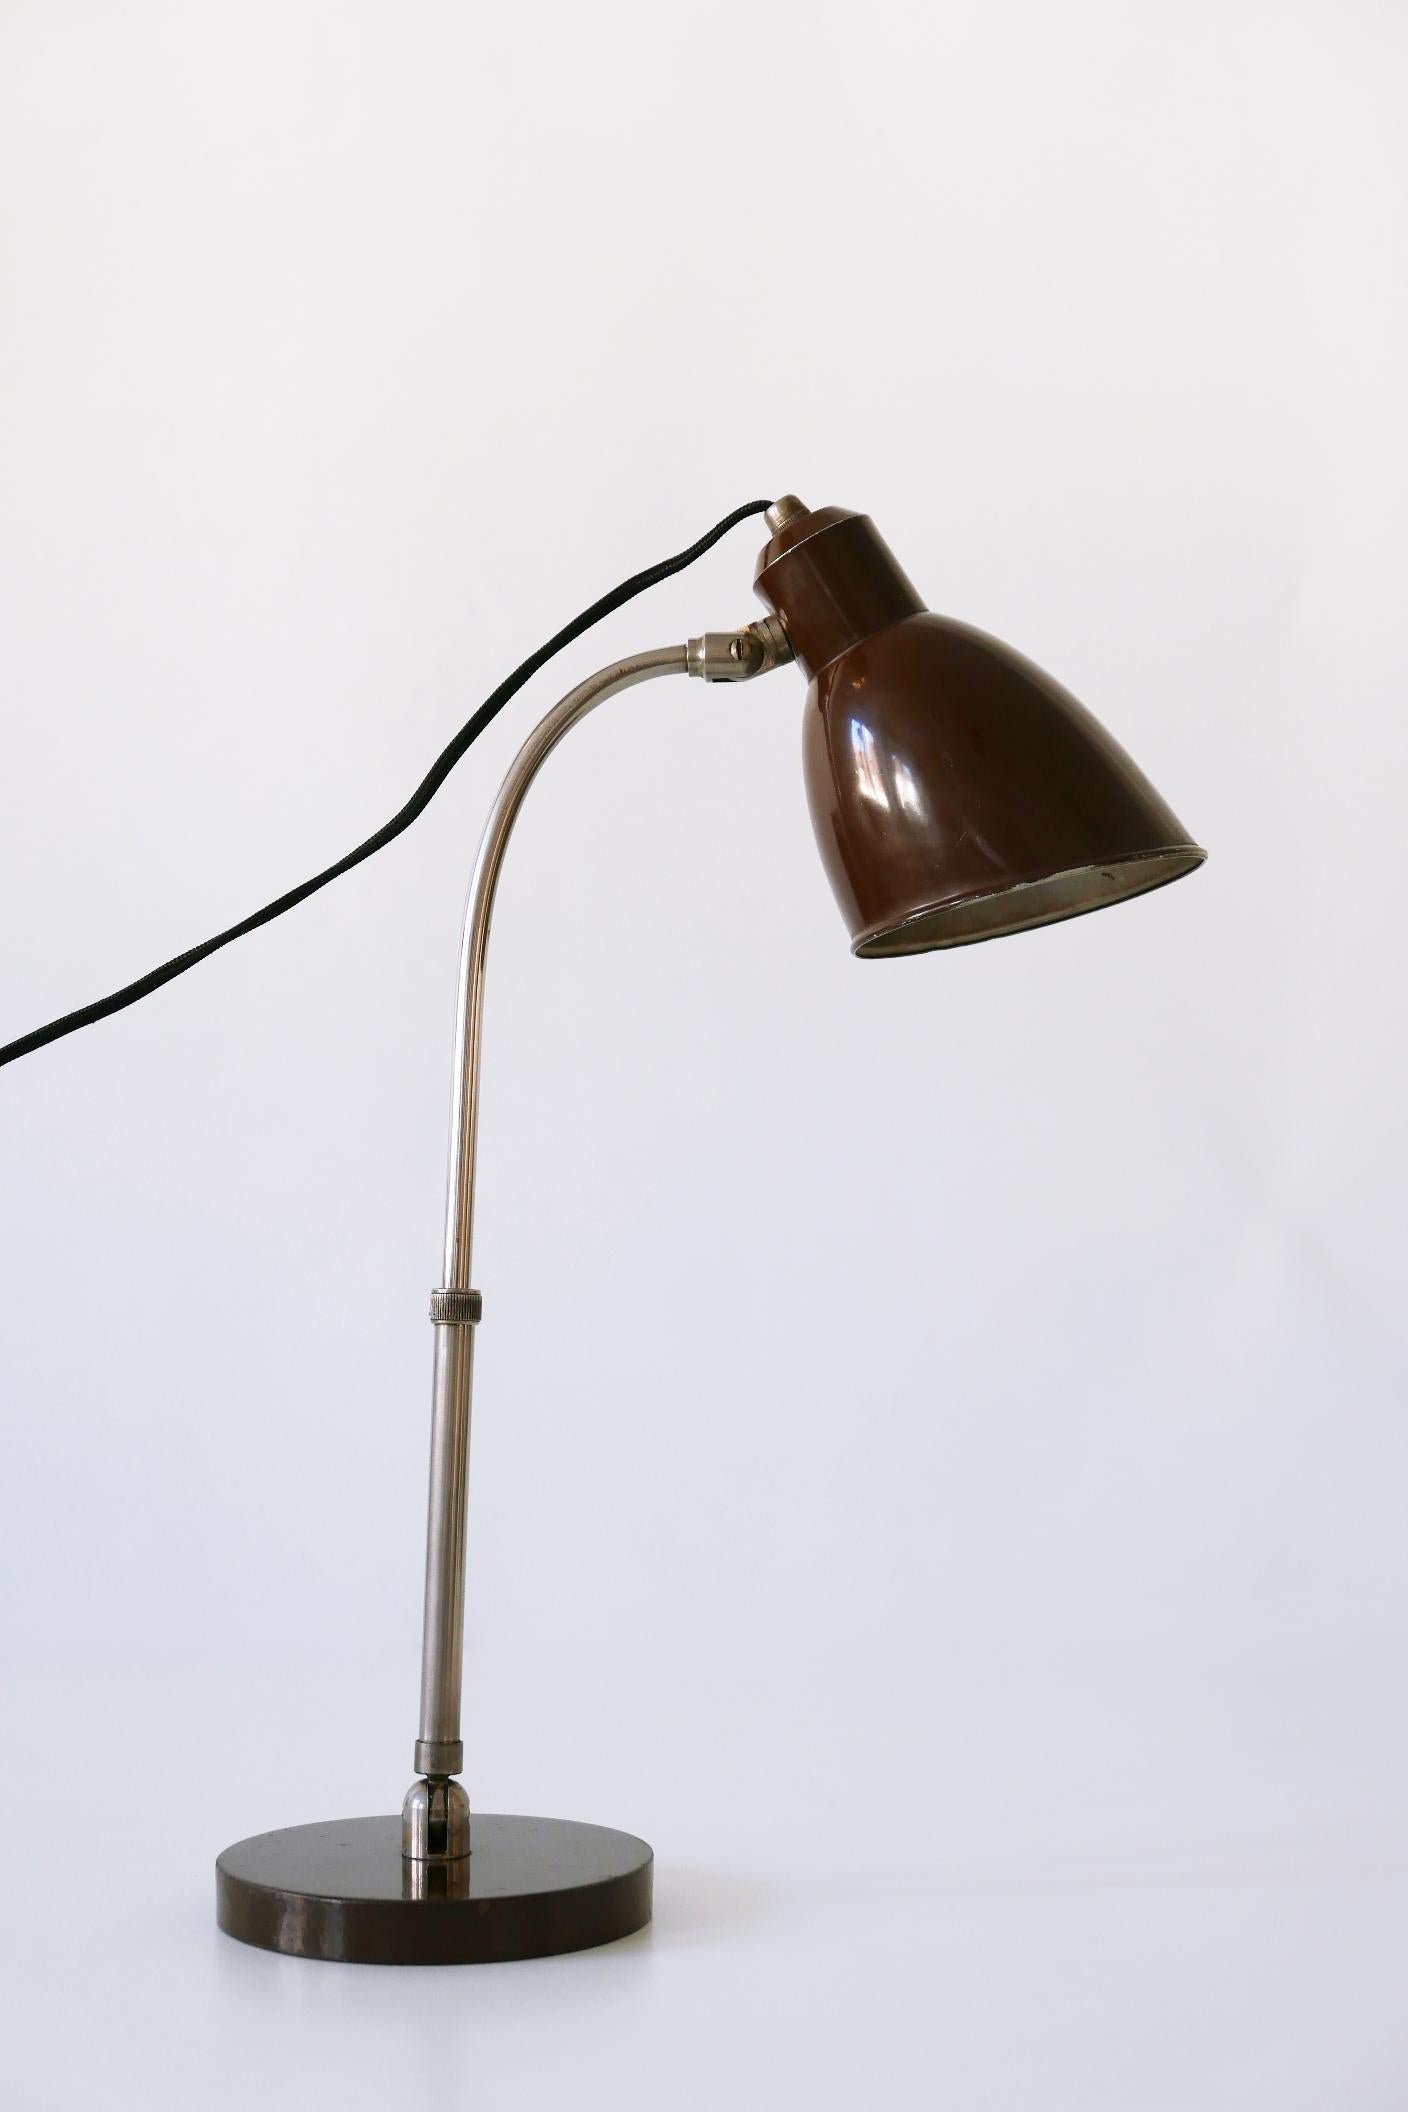 Plated Rare Bauhaus Table Lamp 'Piccolo' by Christian Dell for Bünte & Remmler, 1930s For Sale